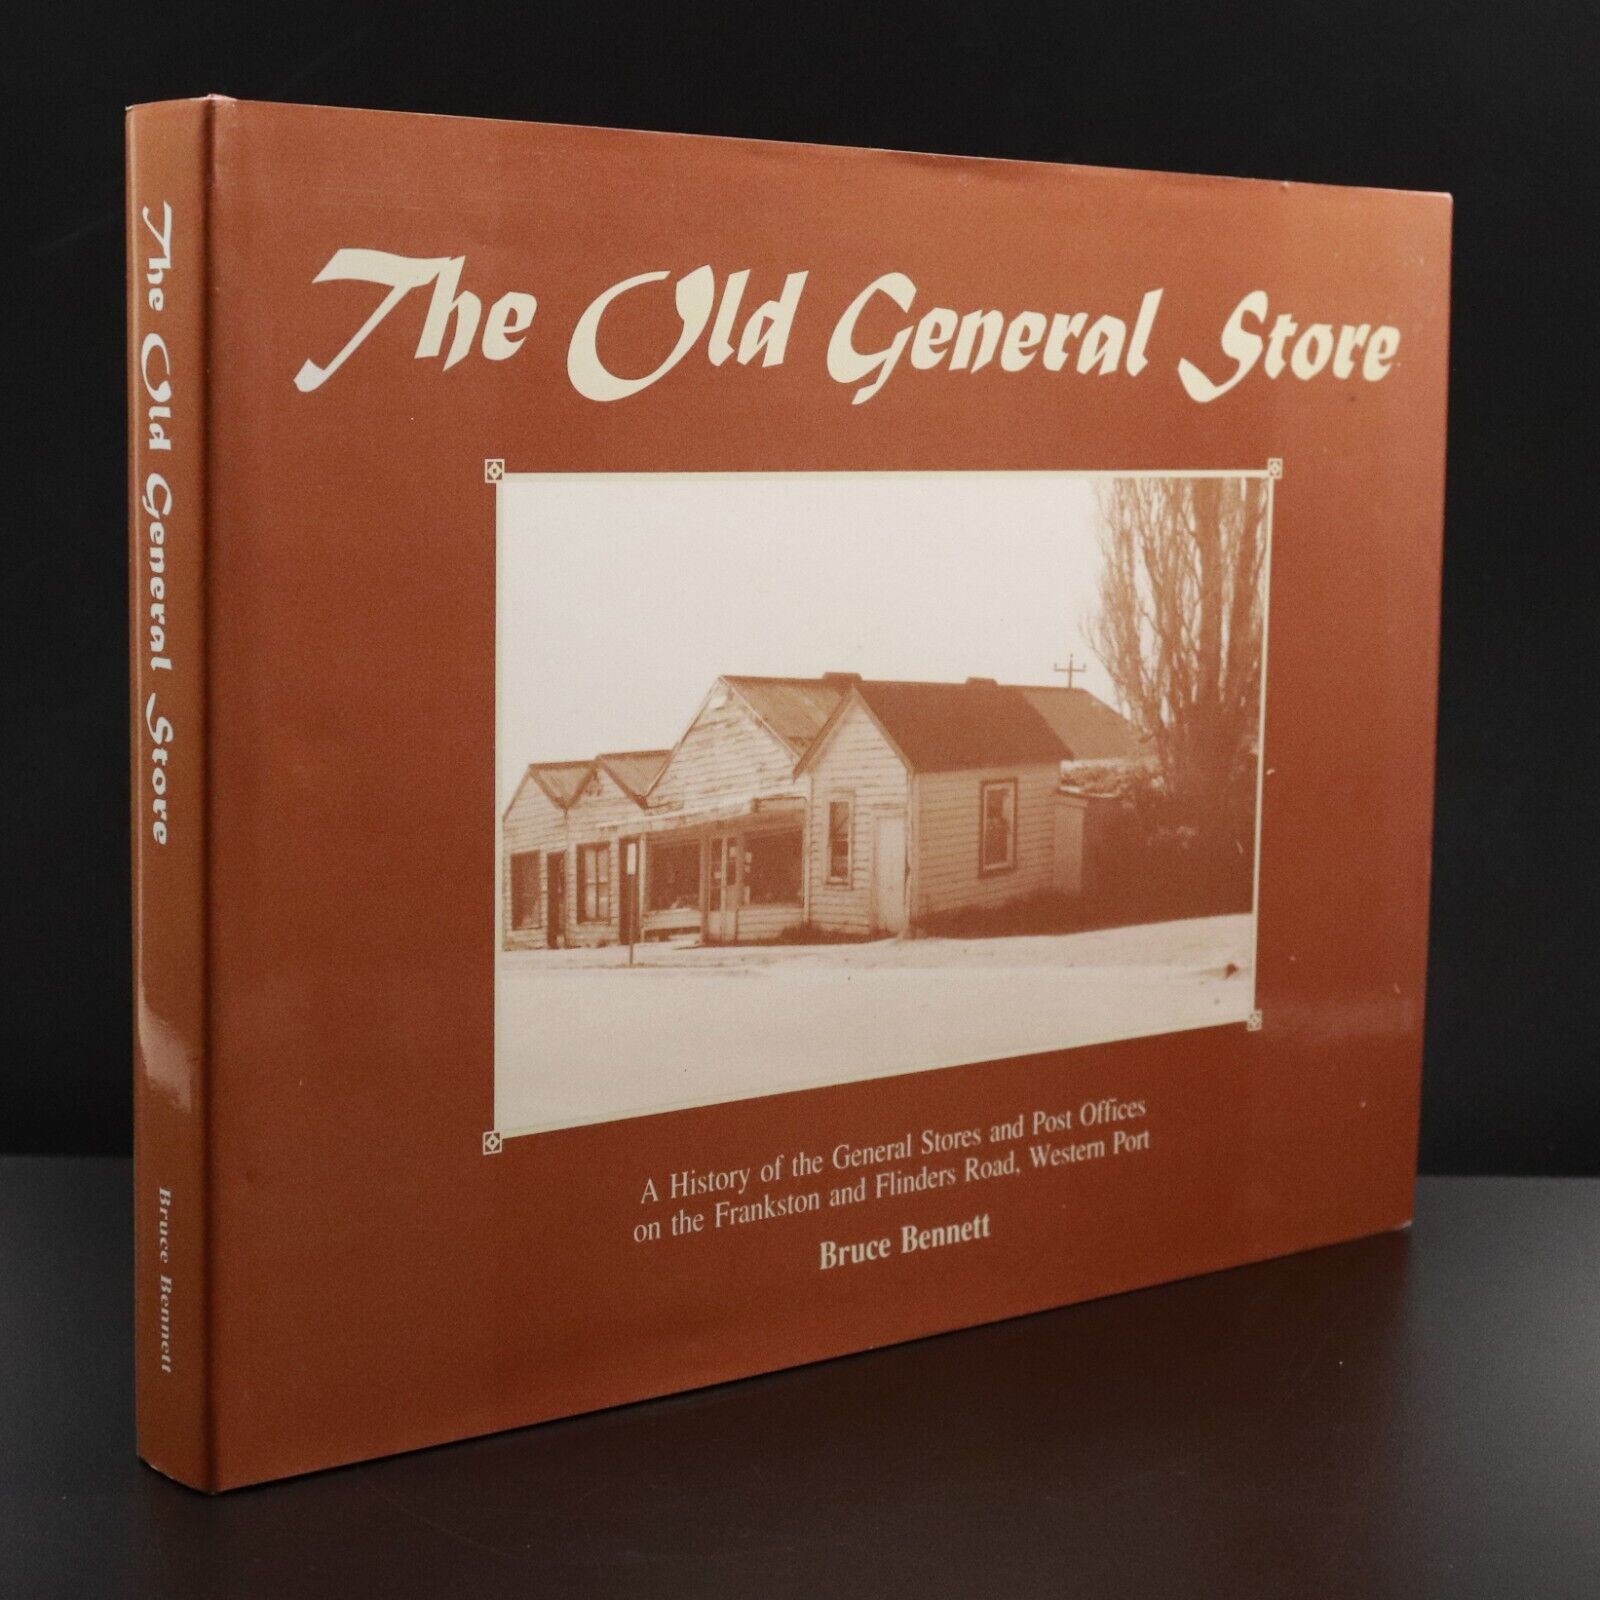 1997 The Old General Store Western Port Flinders Road Local History Book